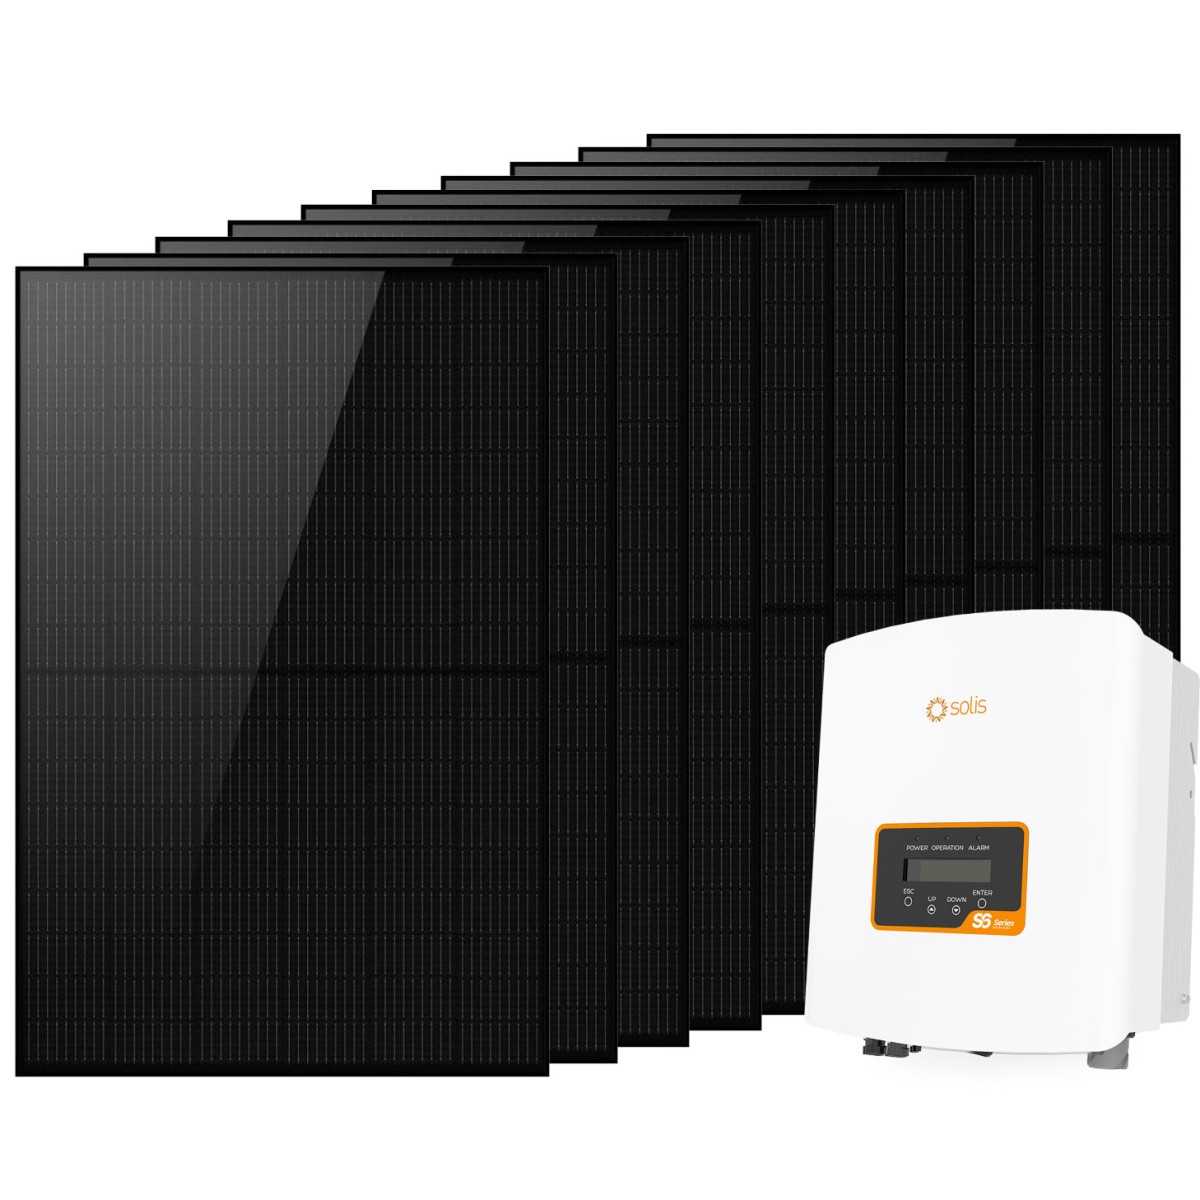 4kW 1-phase Photovoltaic Kit with Solis S6-GR1P3K-M 3kW Inverter